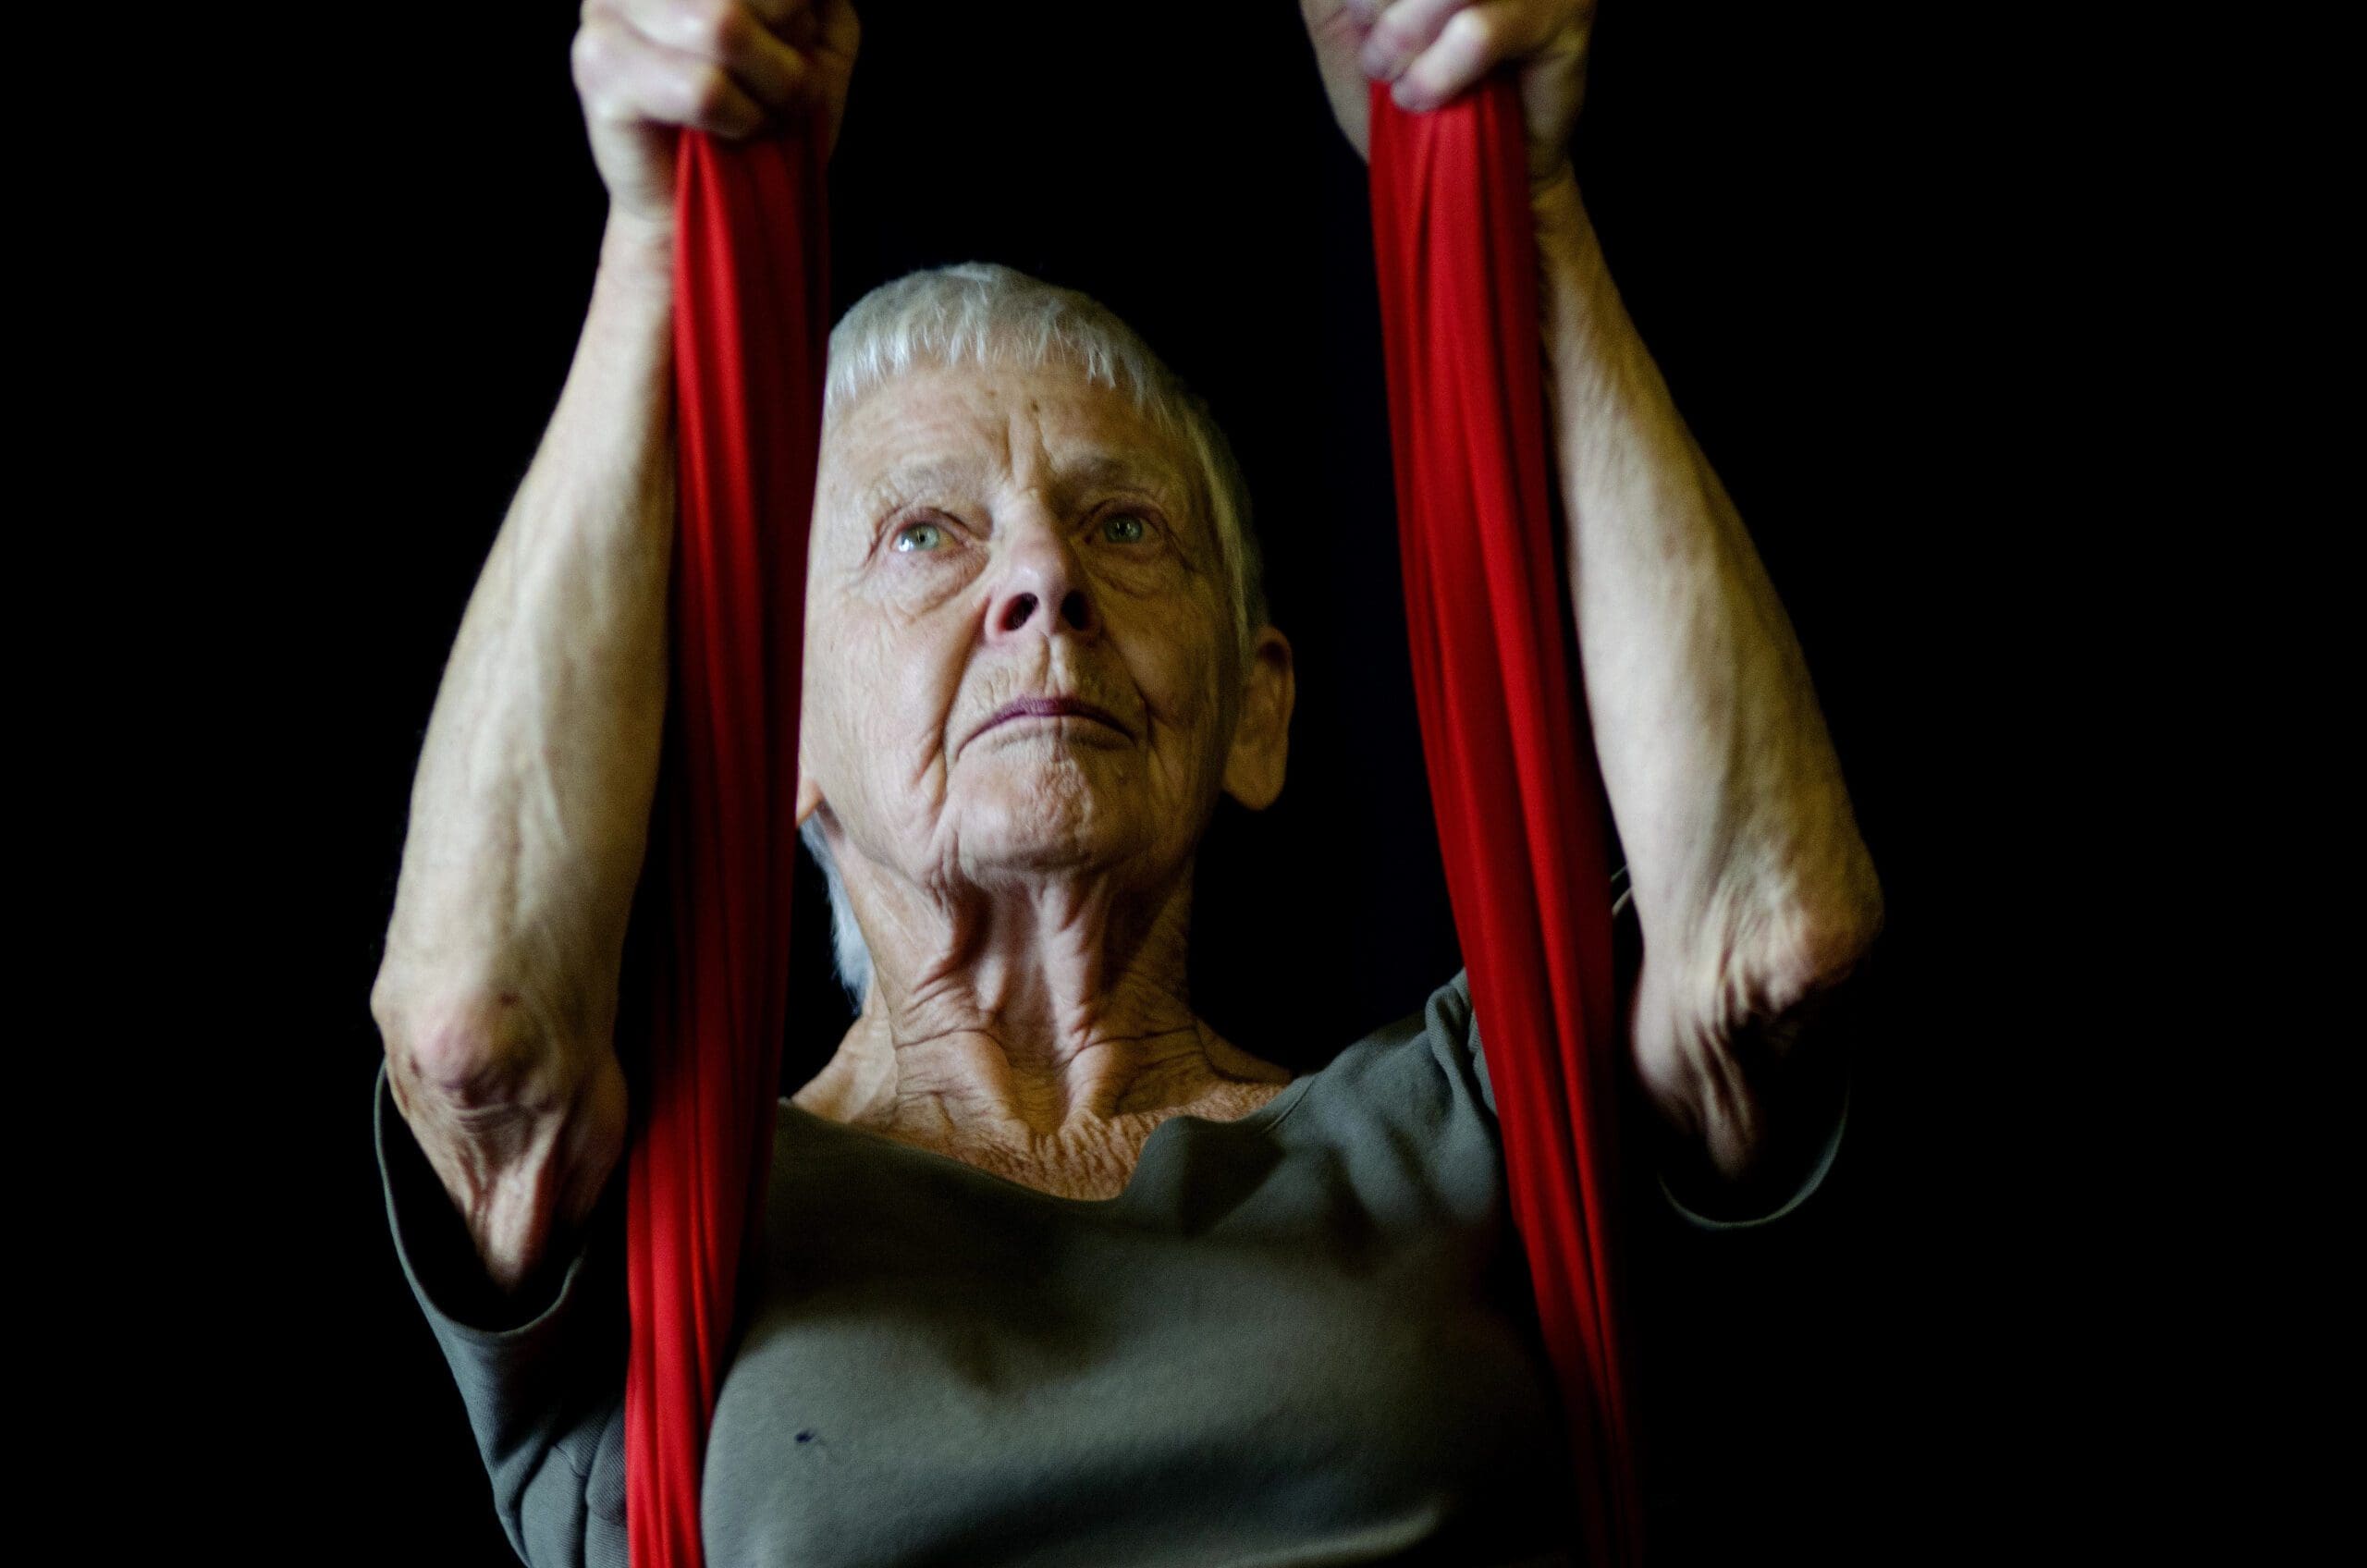 An elderly white woman with short grey hair is holding onto two aerial ropes.